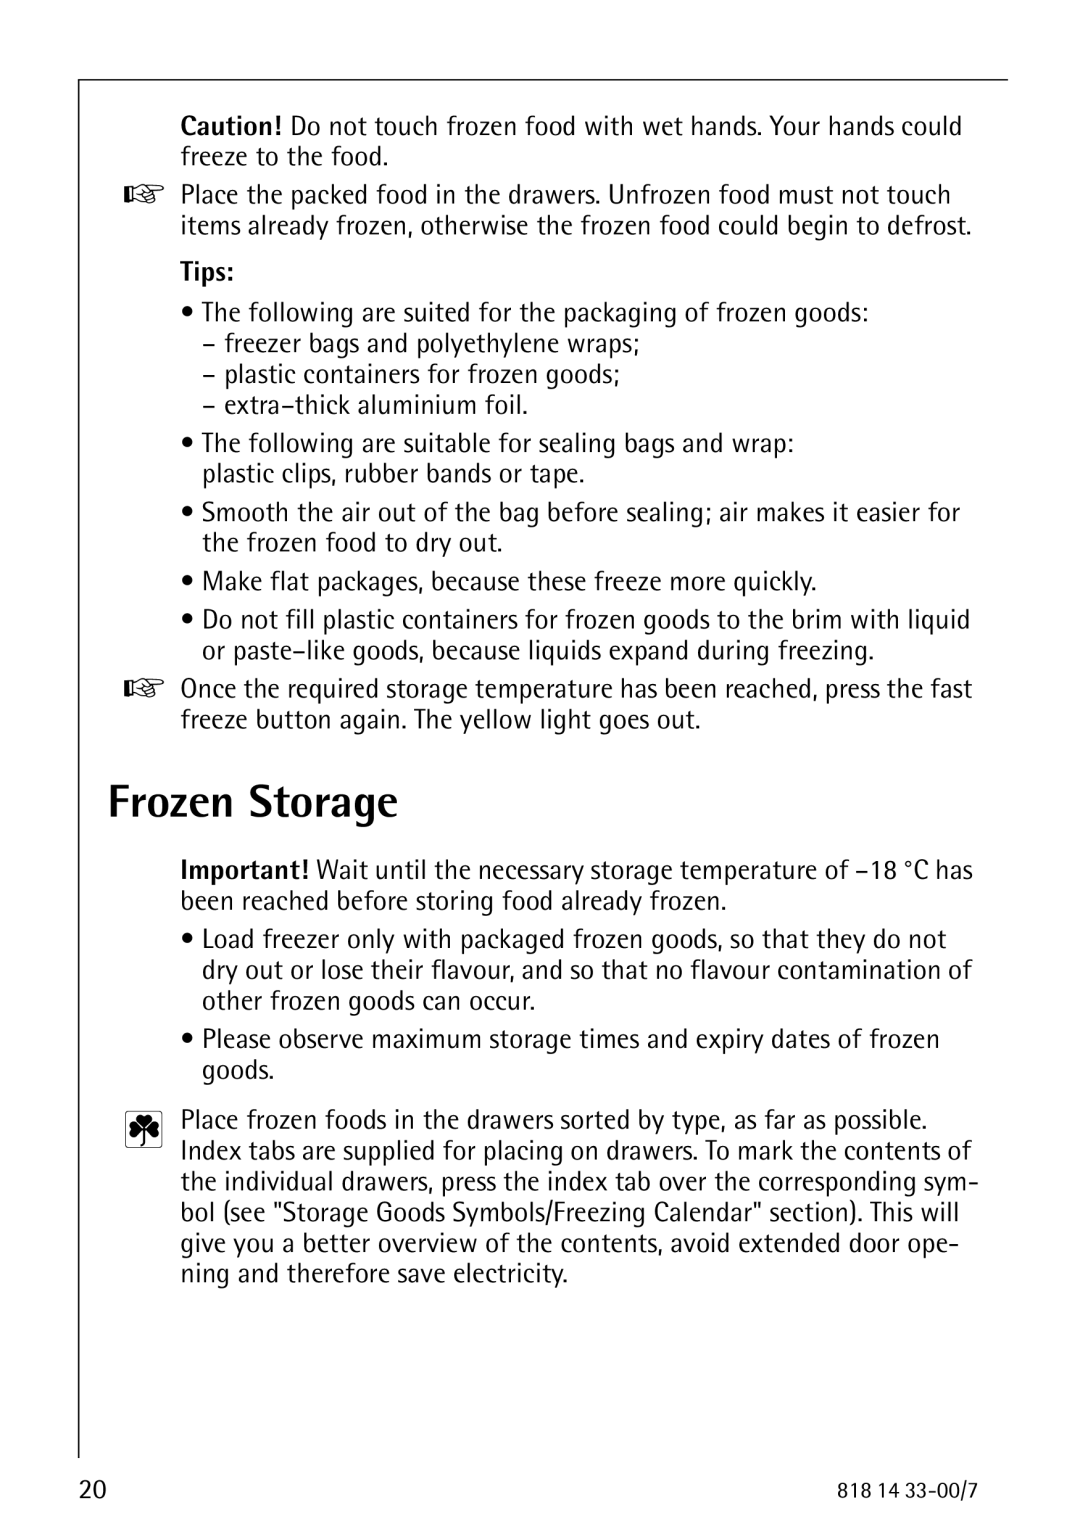 Electrolux 2170-4 operating instructions Frozen Storage, Tips 